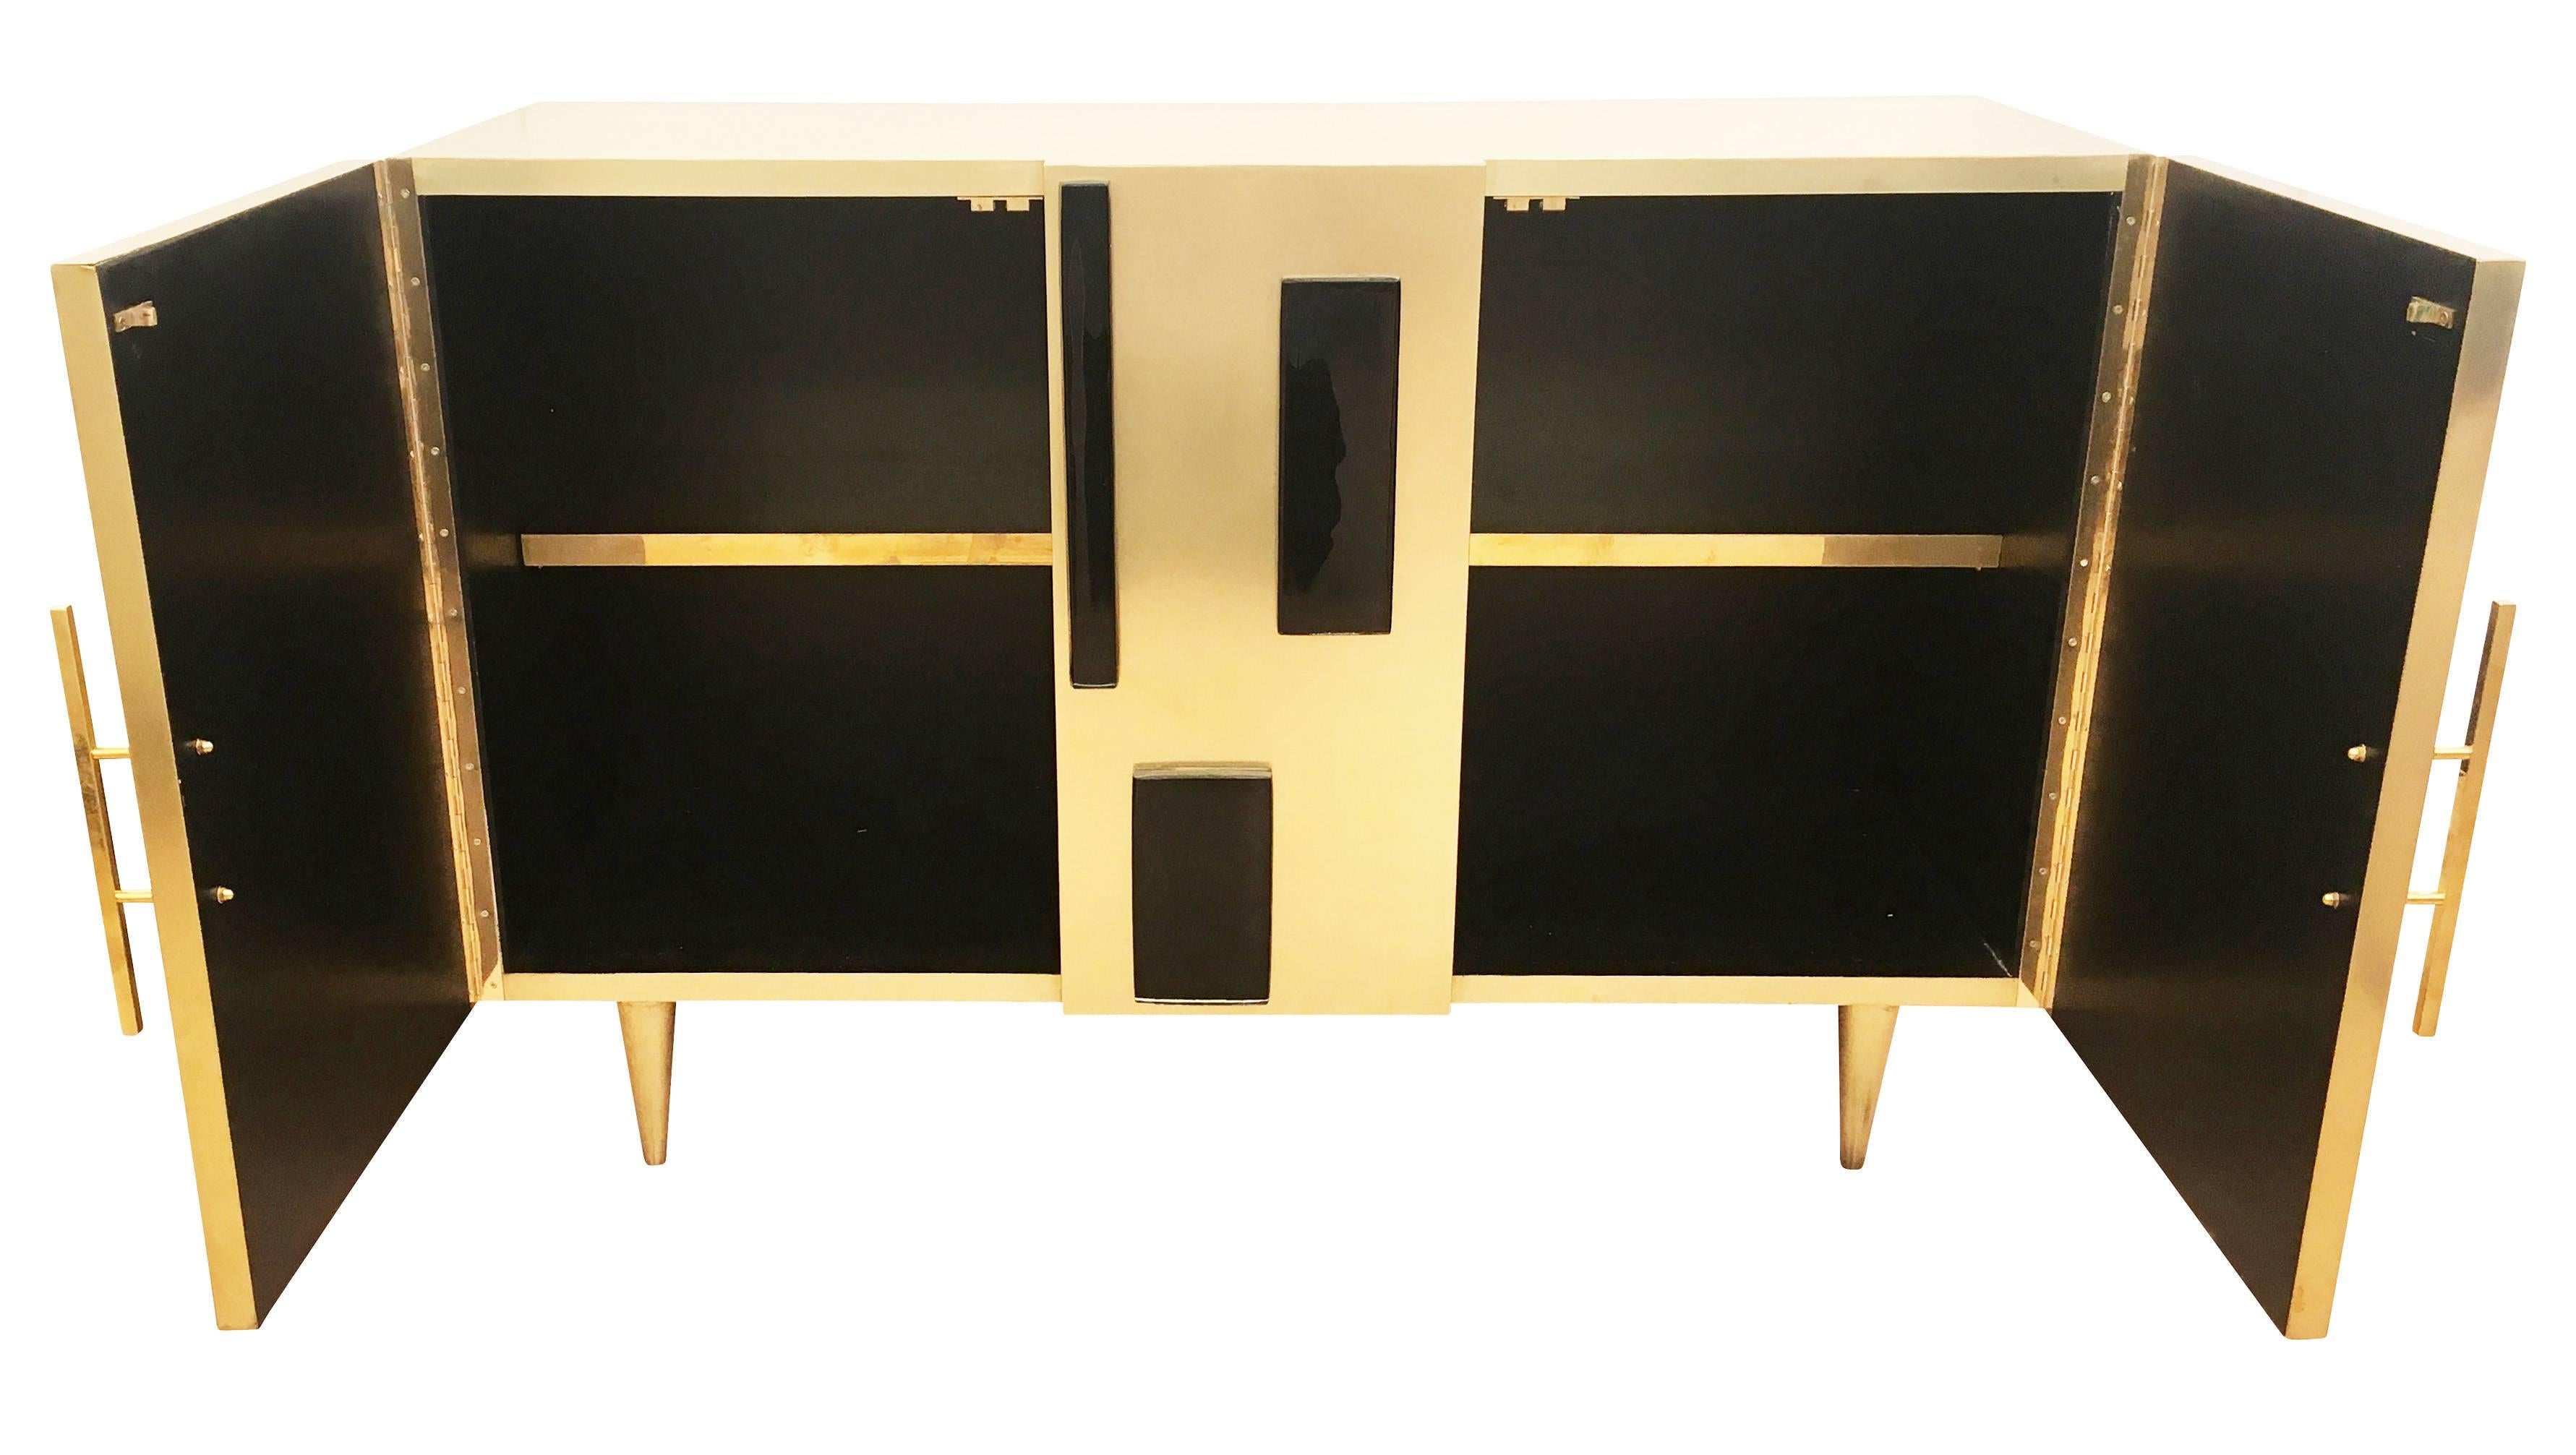 Contemporary Brass and Glass Credenza by Interno 43 for Gaspare Asaro